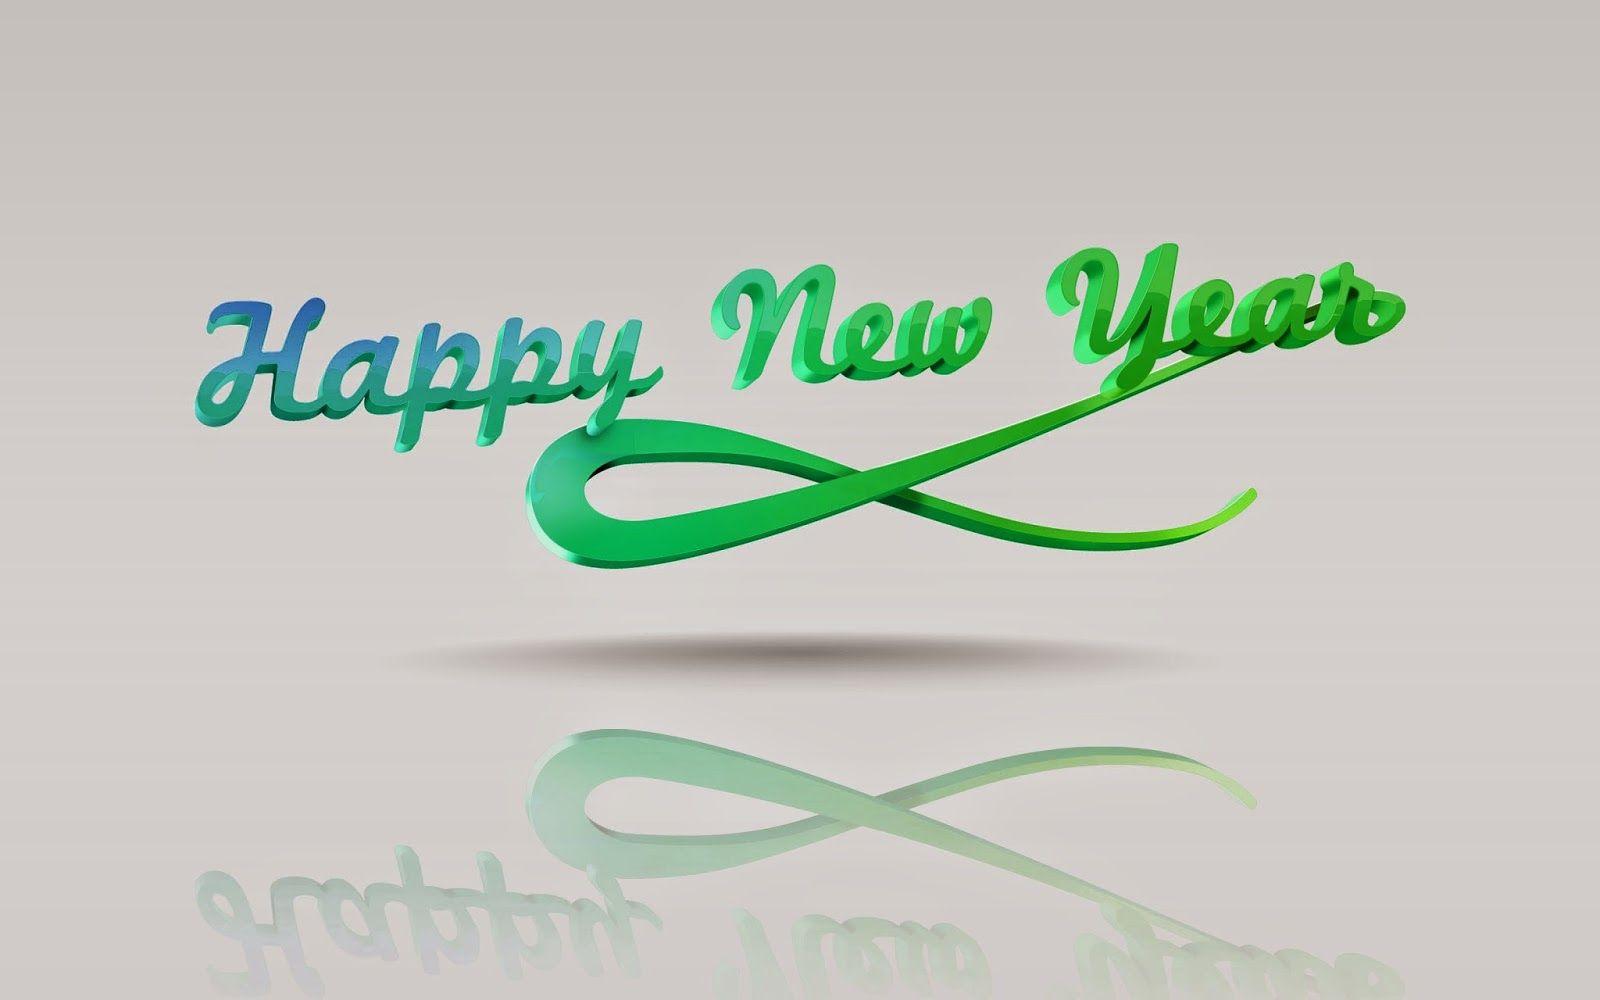 Happy New Year 2016 Wishes Wallpaper, Image, Picture